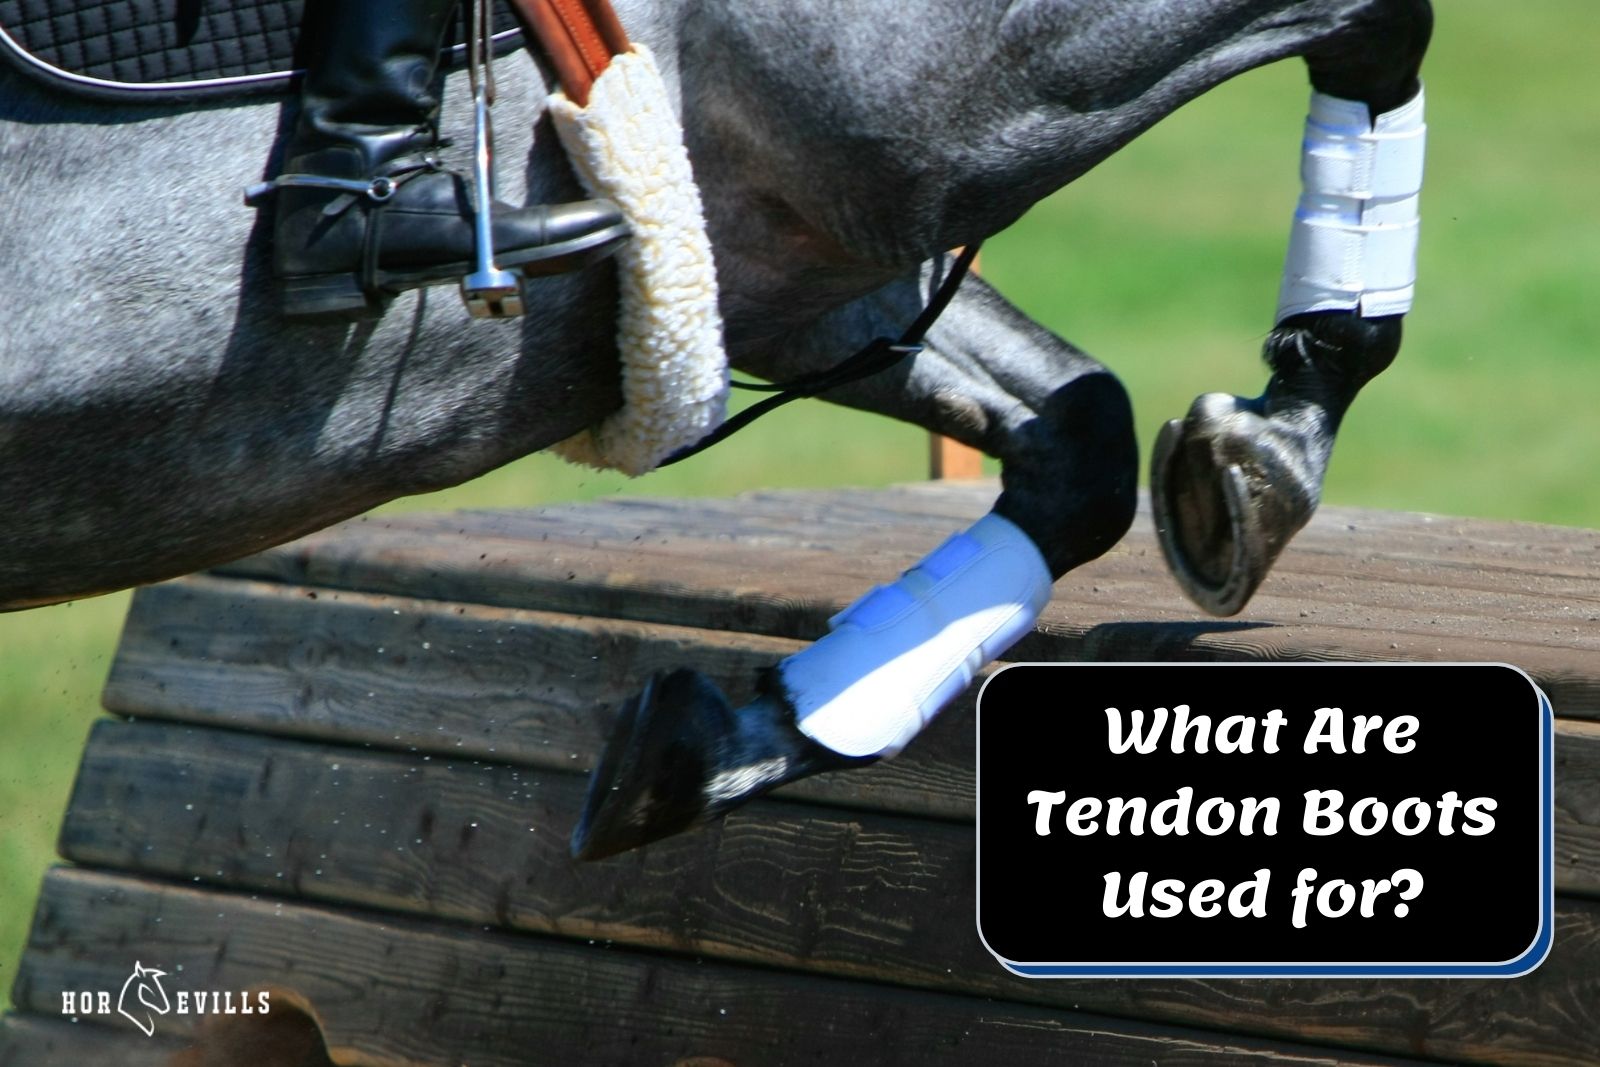 horse using tendon boots in a showjumping event but what are tendon boots used for?